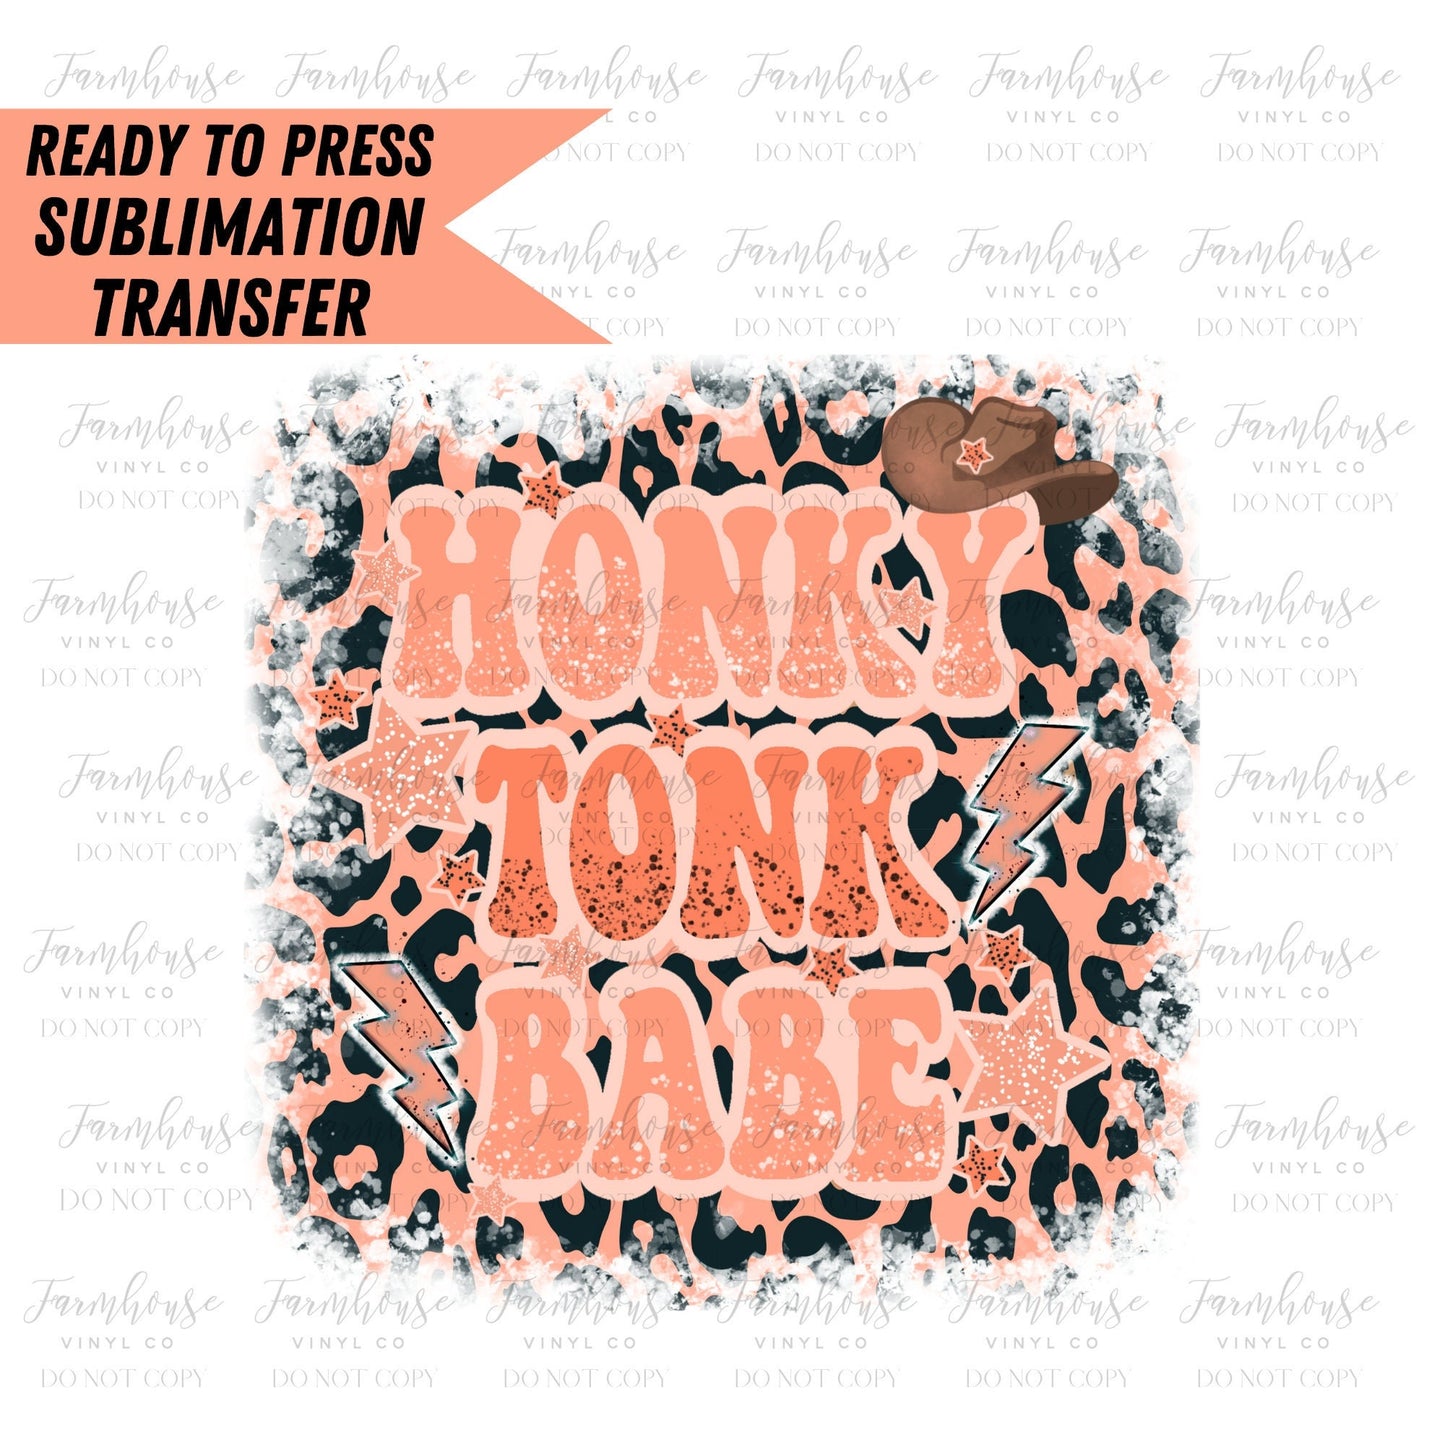 Honky Tonk Babe Leopard Retro, Ready to Press Sublimation Transfer, Sublimation Transfers, Transfer, Southern Country Rodeo, Cowgirl Design - Farmhouse Vinyl Co